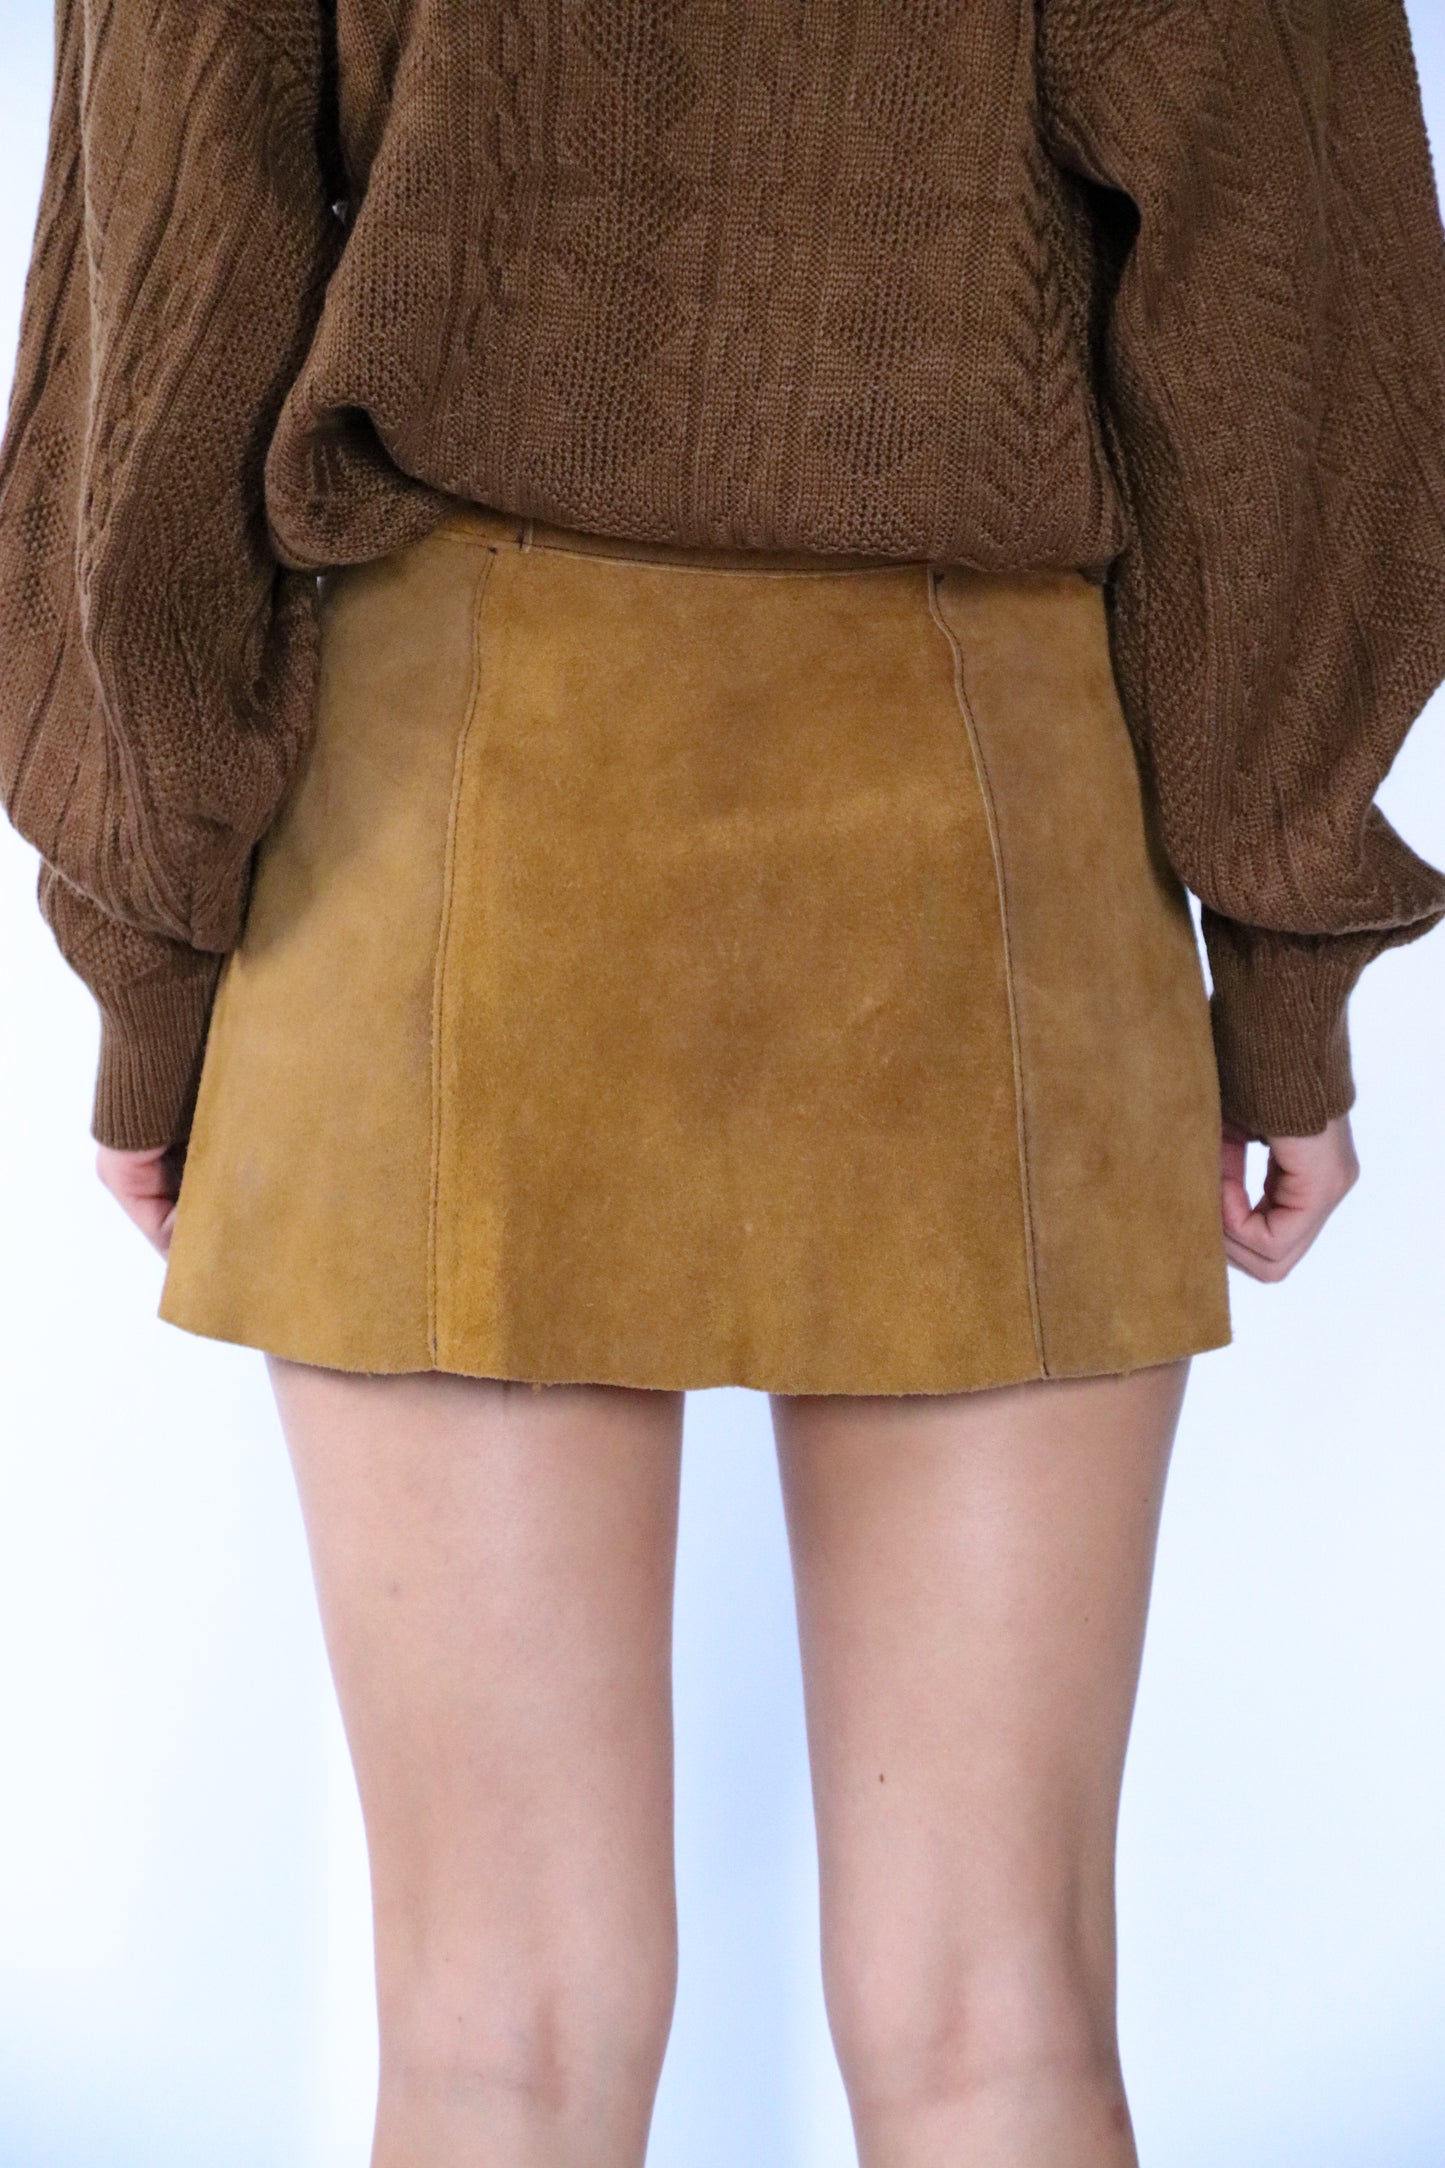 tate suede skirt - XS/S